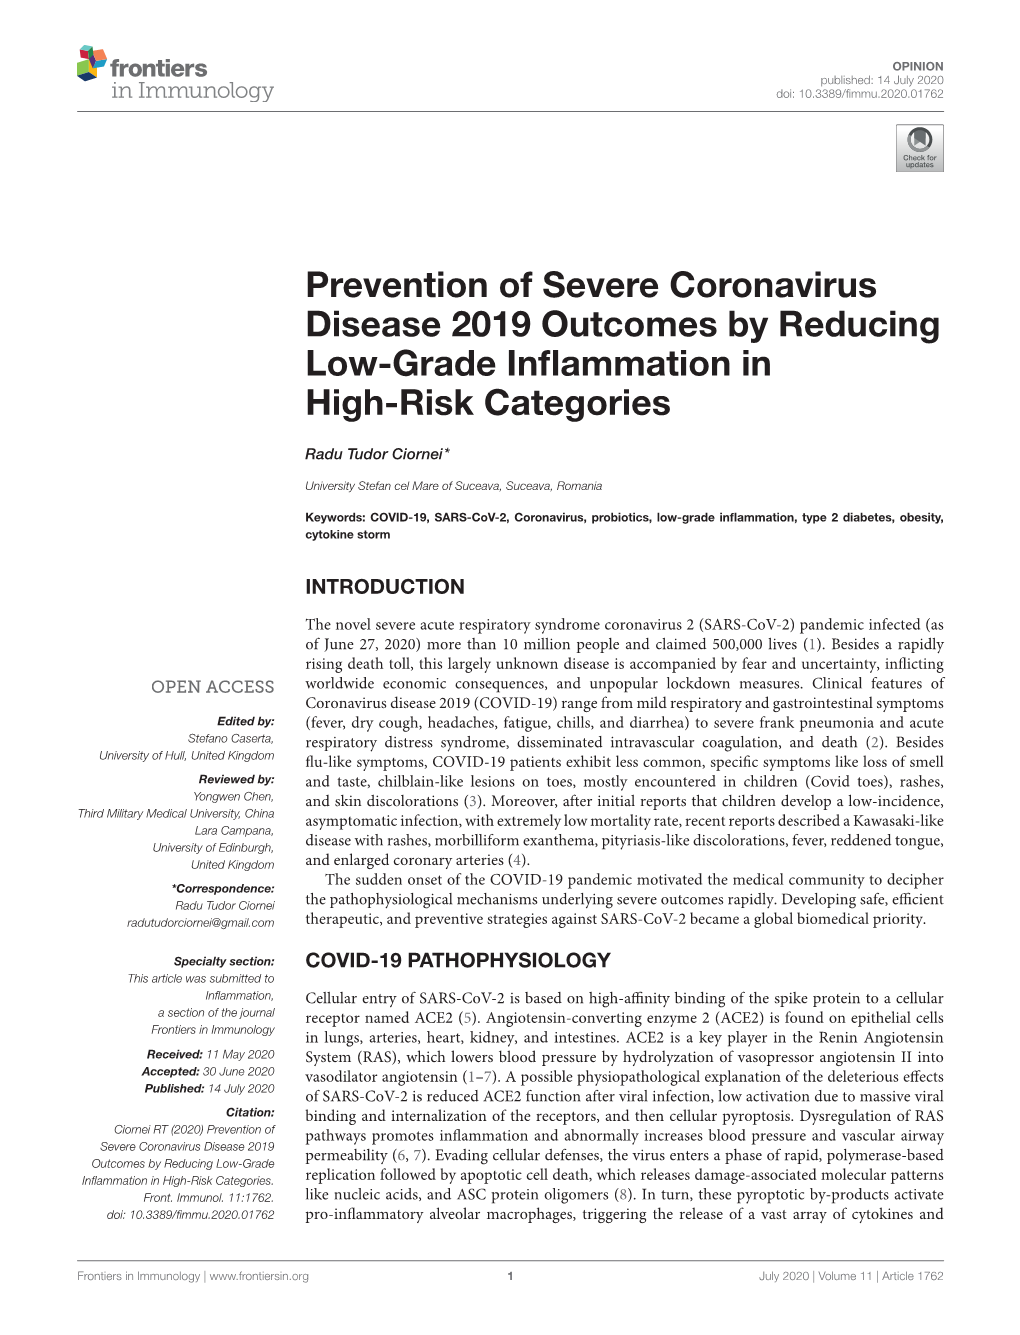 Prevention of Severe Coronavirus Disease 2019 Outcomes by Reducing Low-Grade Inﬂammation in High-Risk Categories